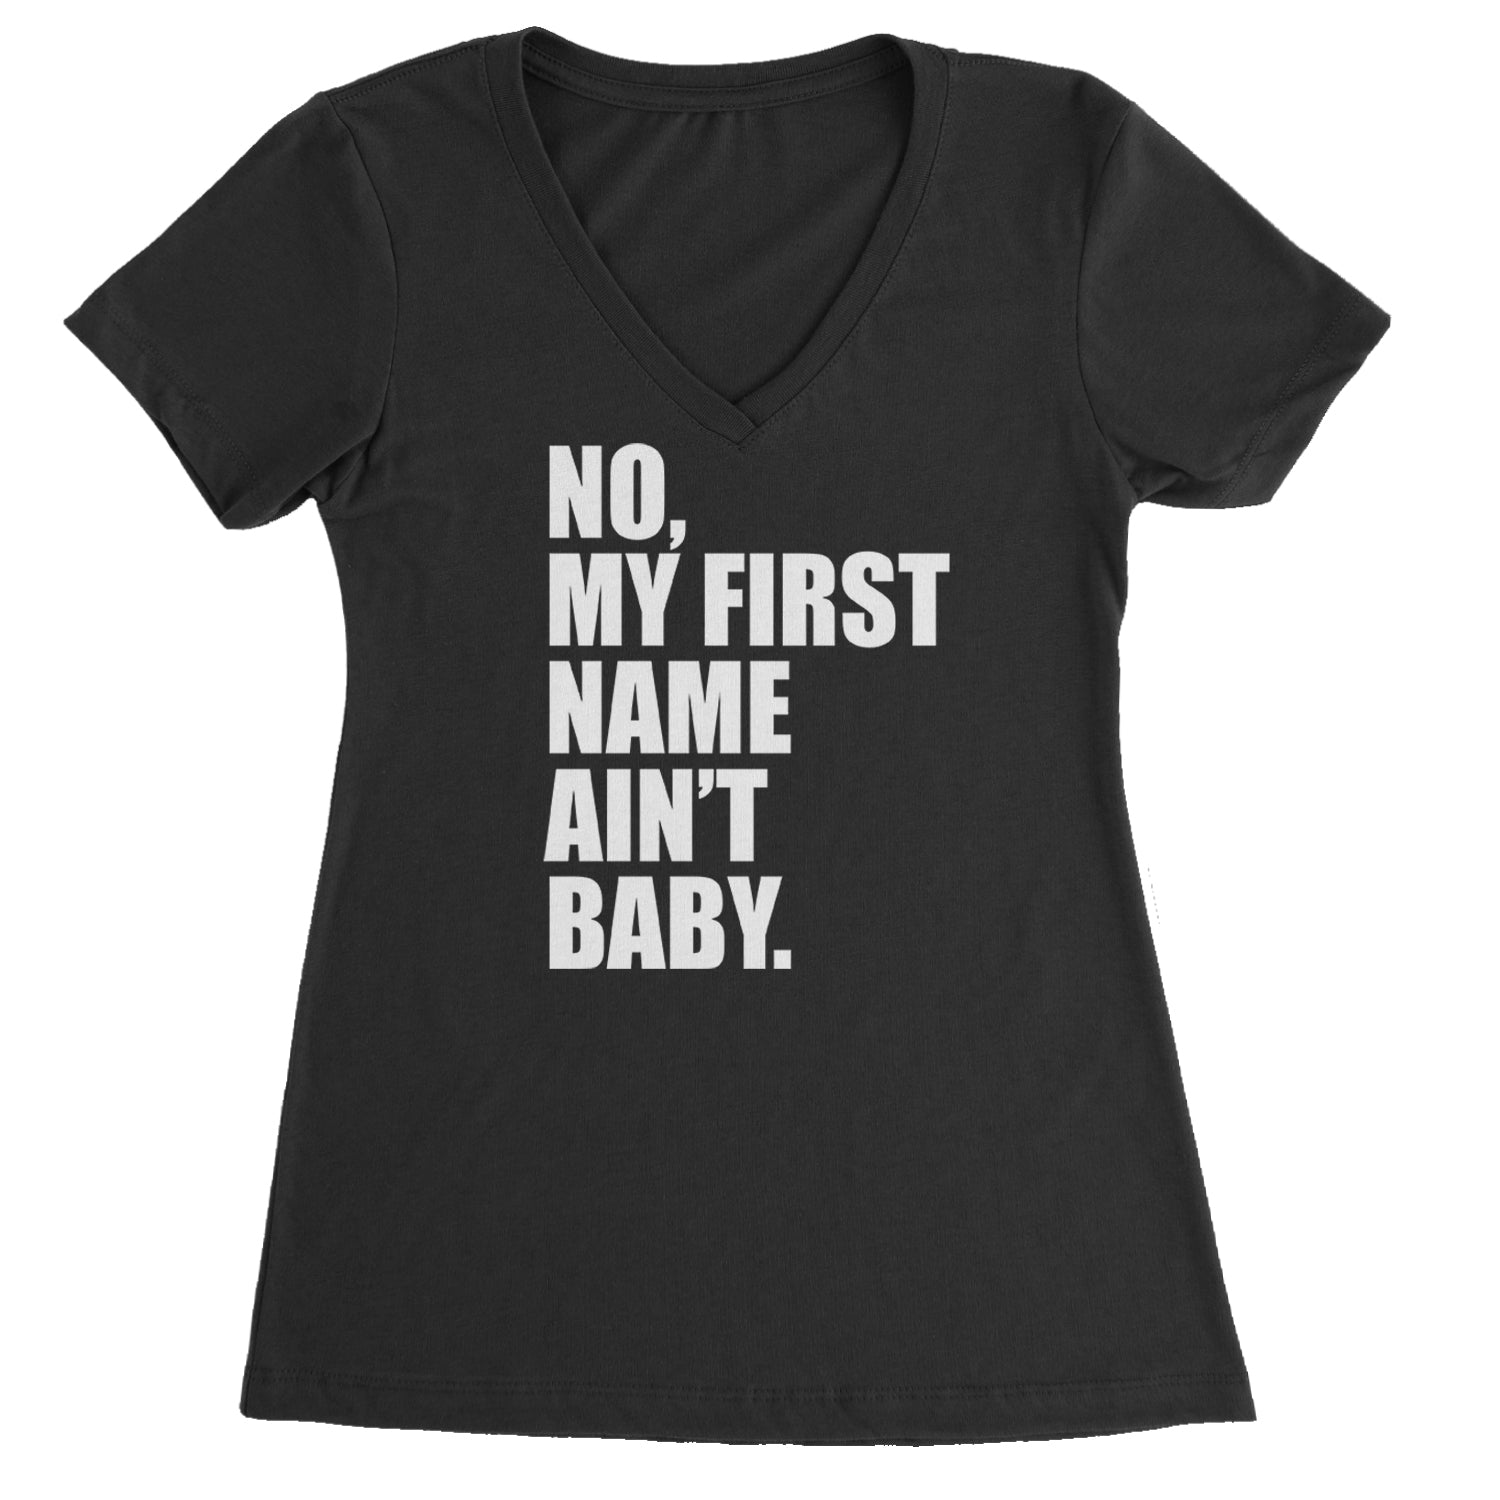 No My First Name Ain't Baby Together Again Ladies V-Neck T-shirt Black